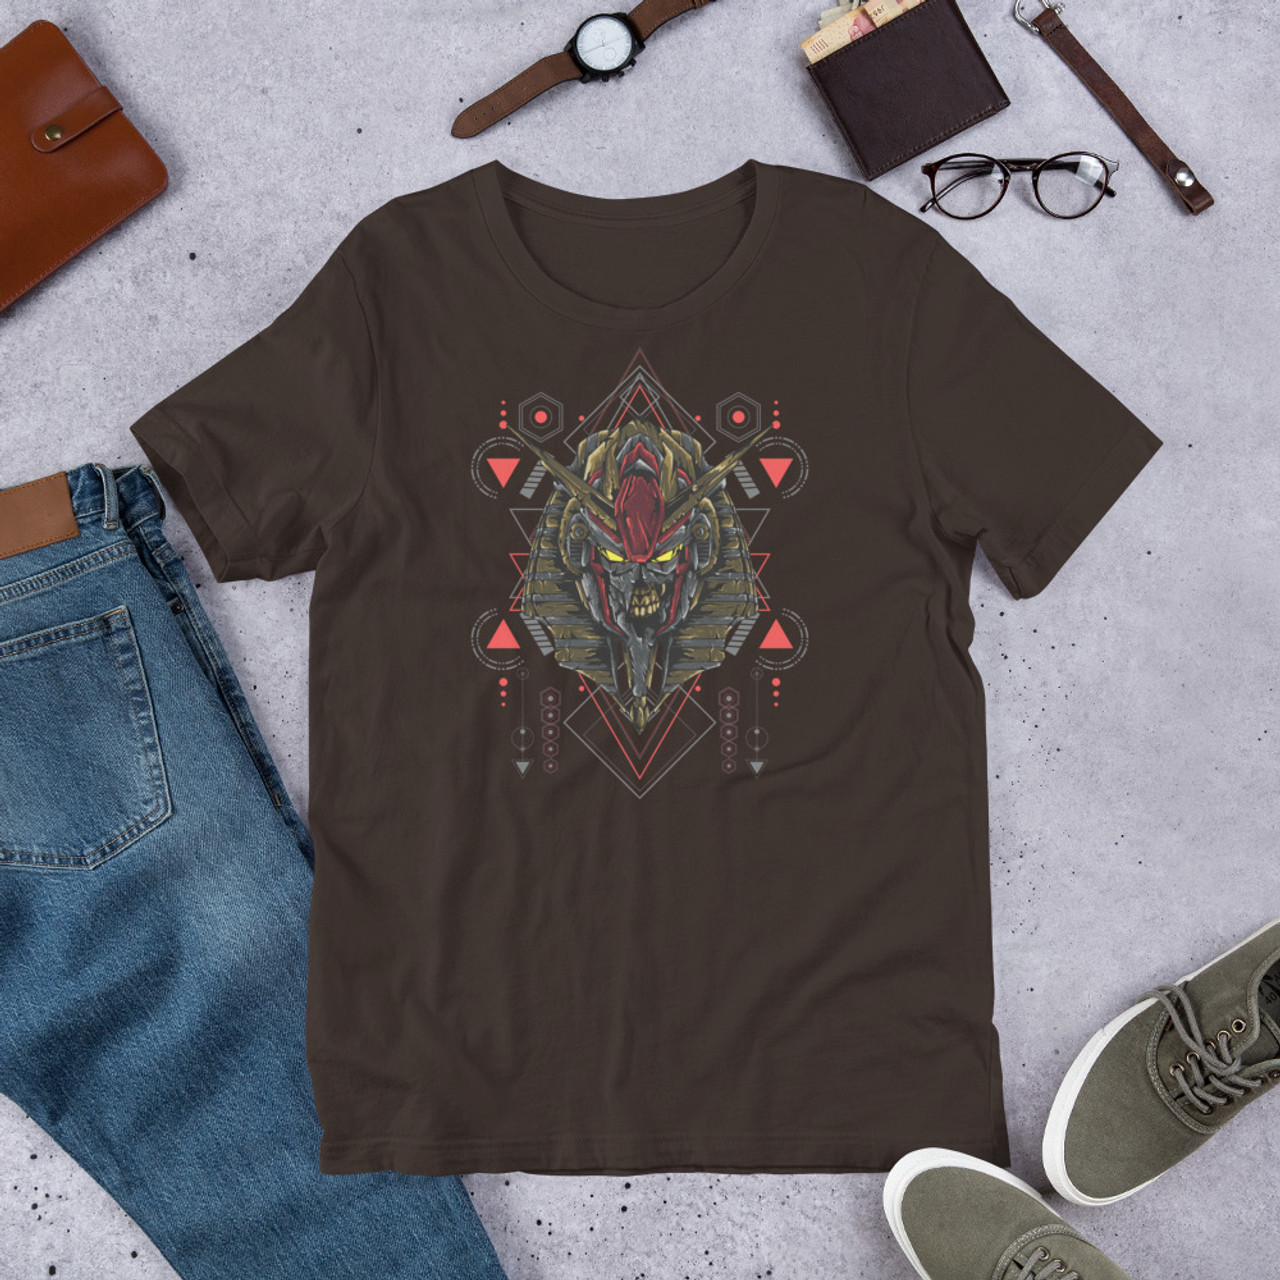 Brown T-Shirt - Bella + Canvas 3001 Anubis Egyptian God of the Dead